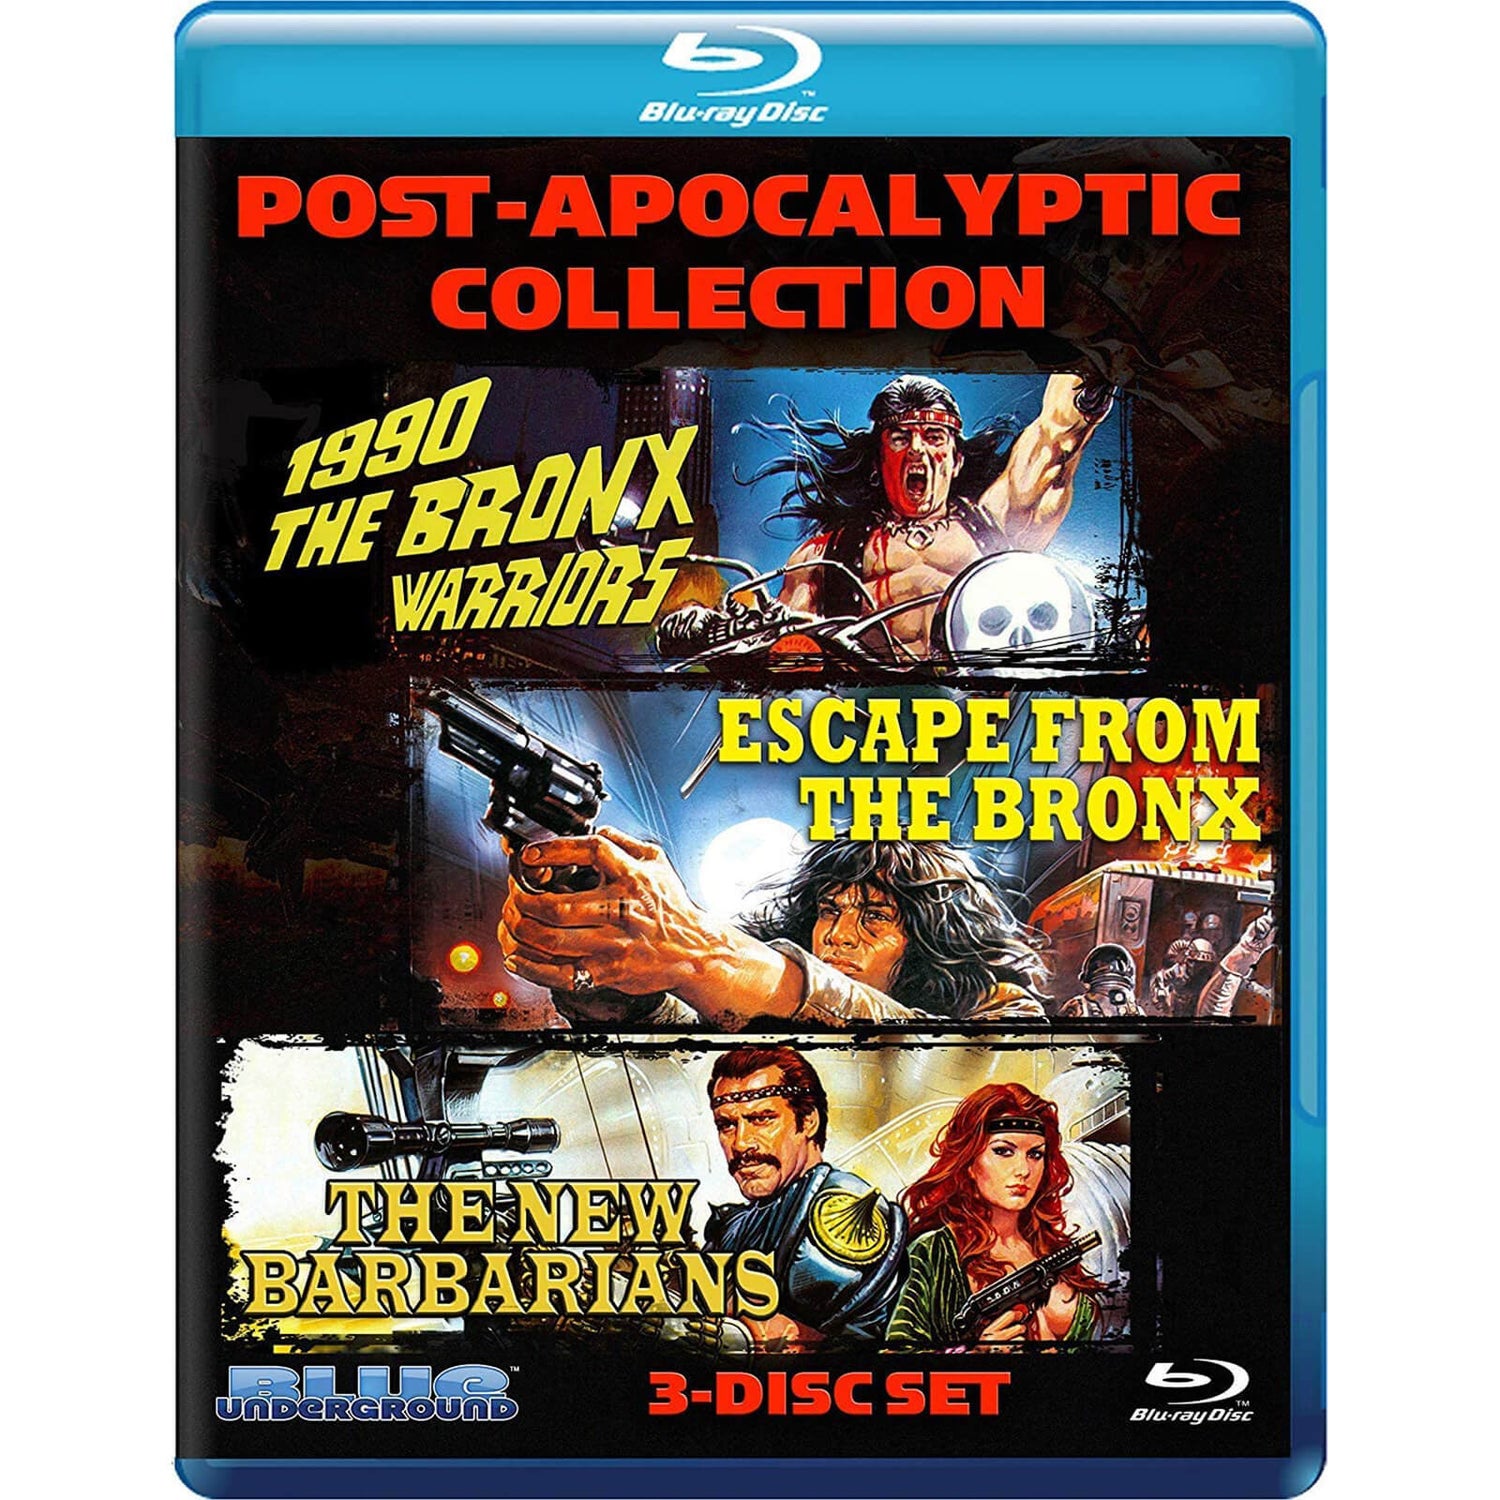 Post-Apocalyptic Collection: 1990 The Bronx Warriors / Escape From The Bronx / The New Barbarians